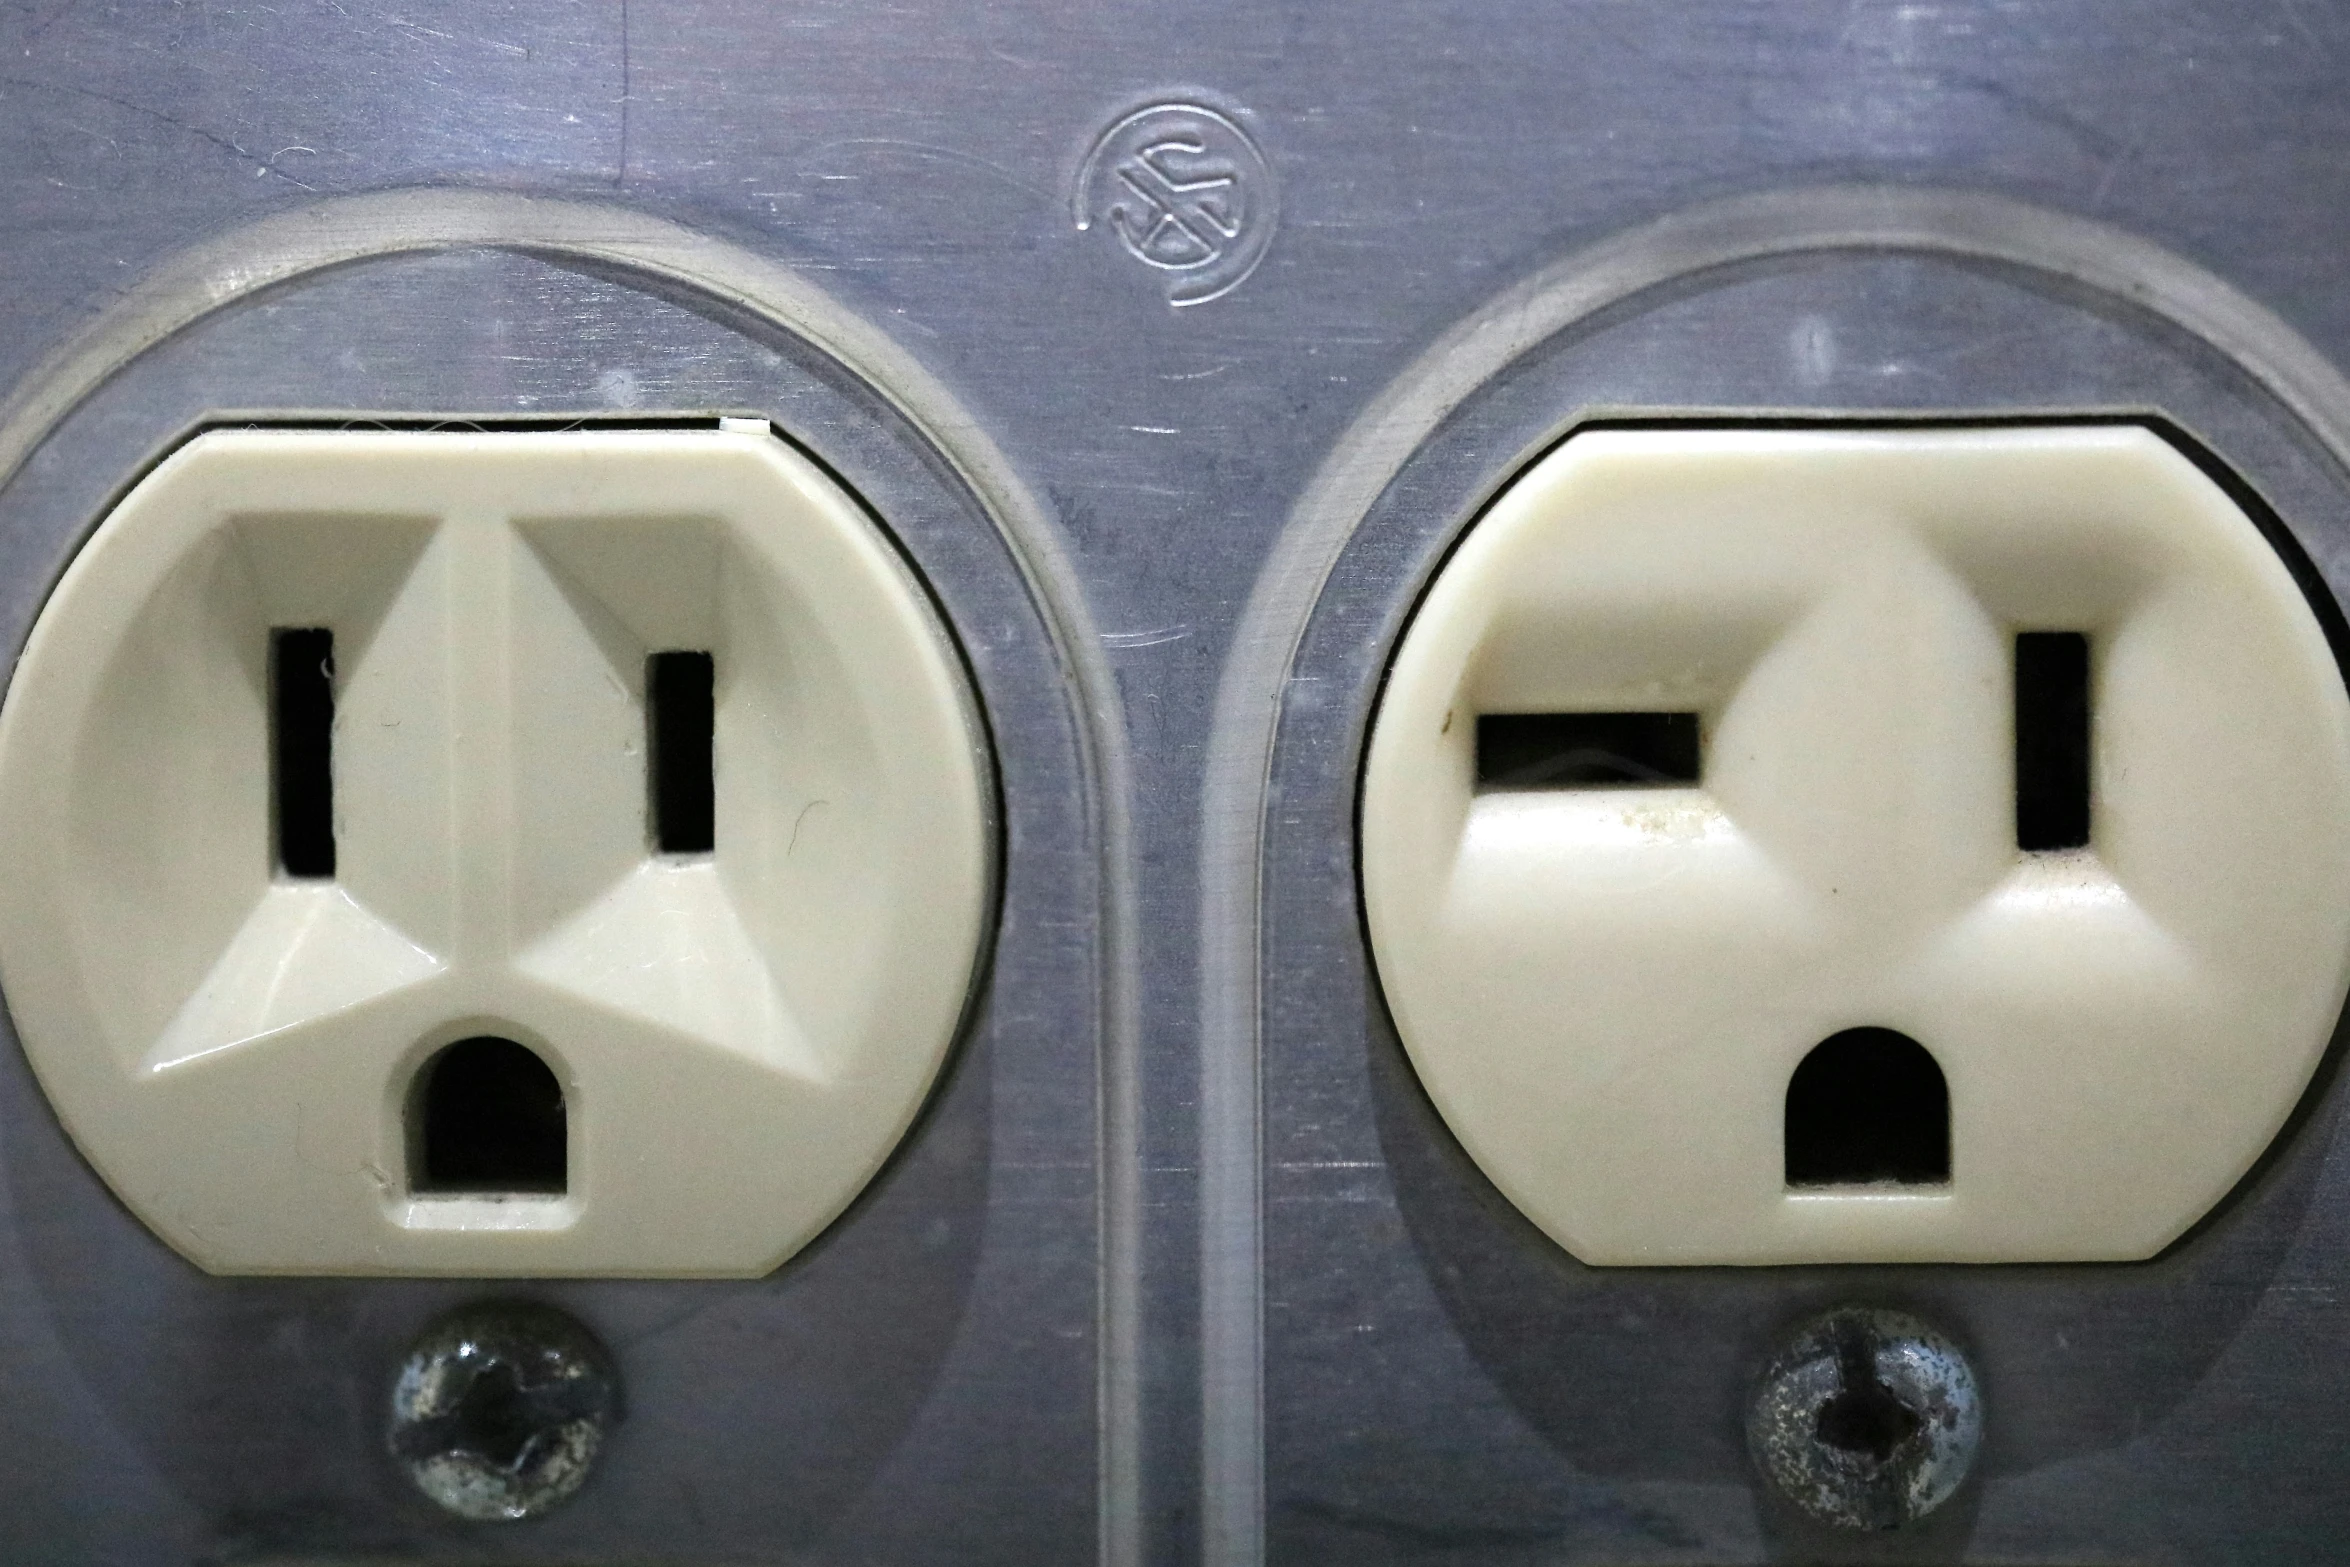 two identical electrical outlets, one white and one silver